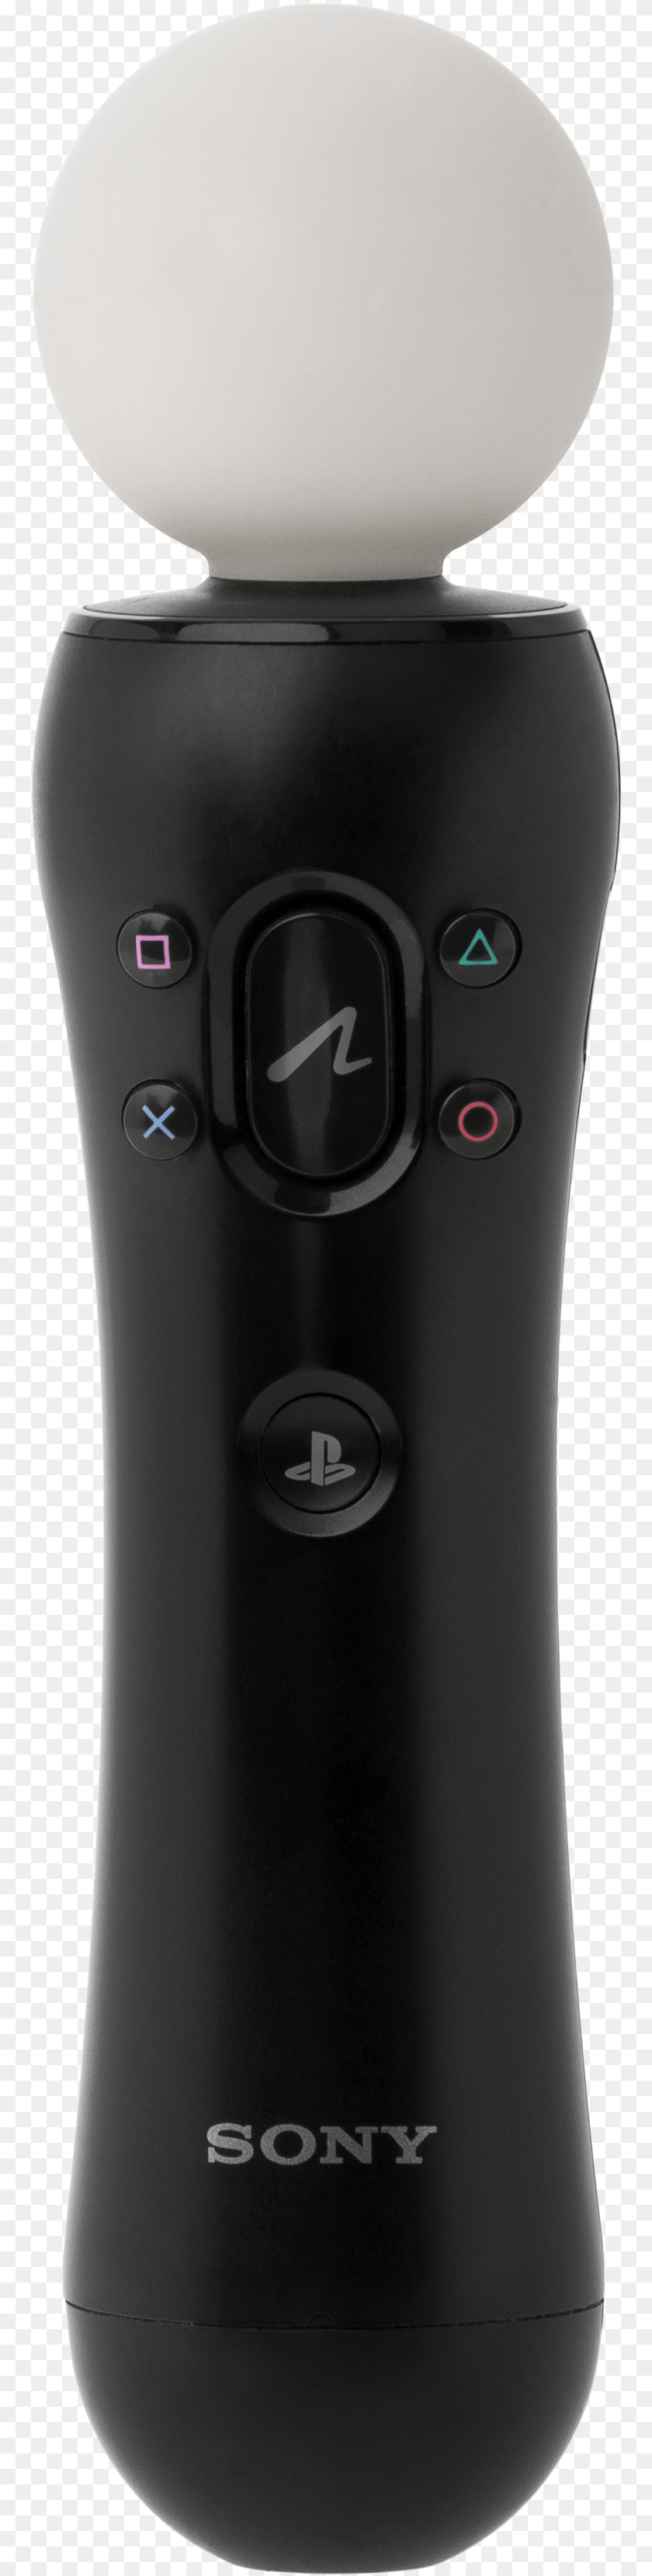 766x3318 Related Image Sony Corporation, Electronics, Speaker, Remote Control Transparent PNG